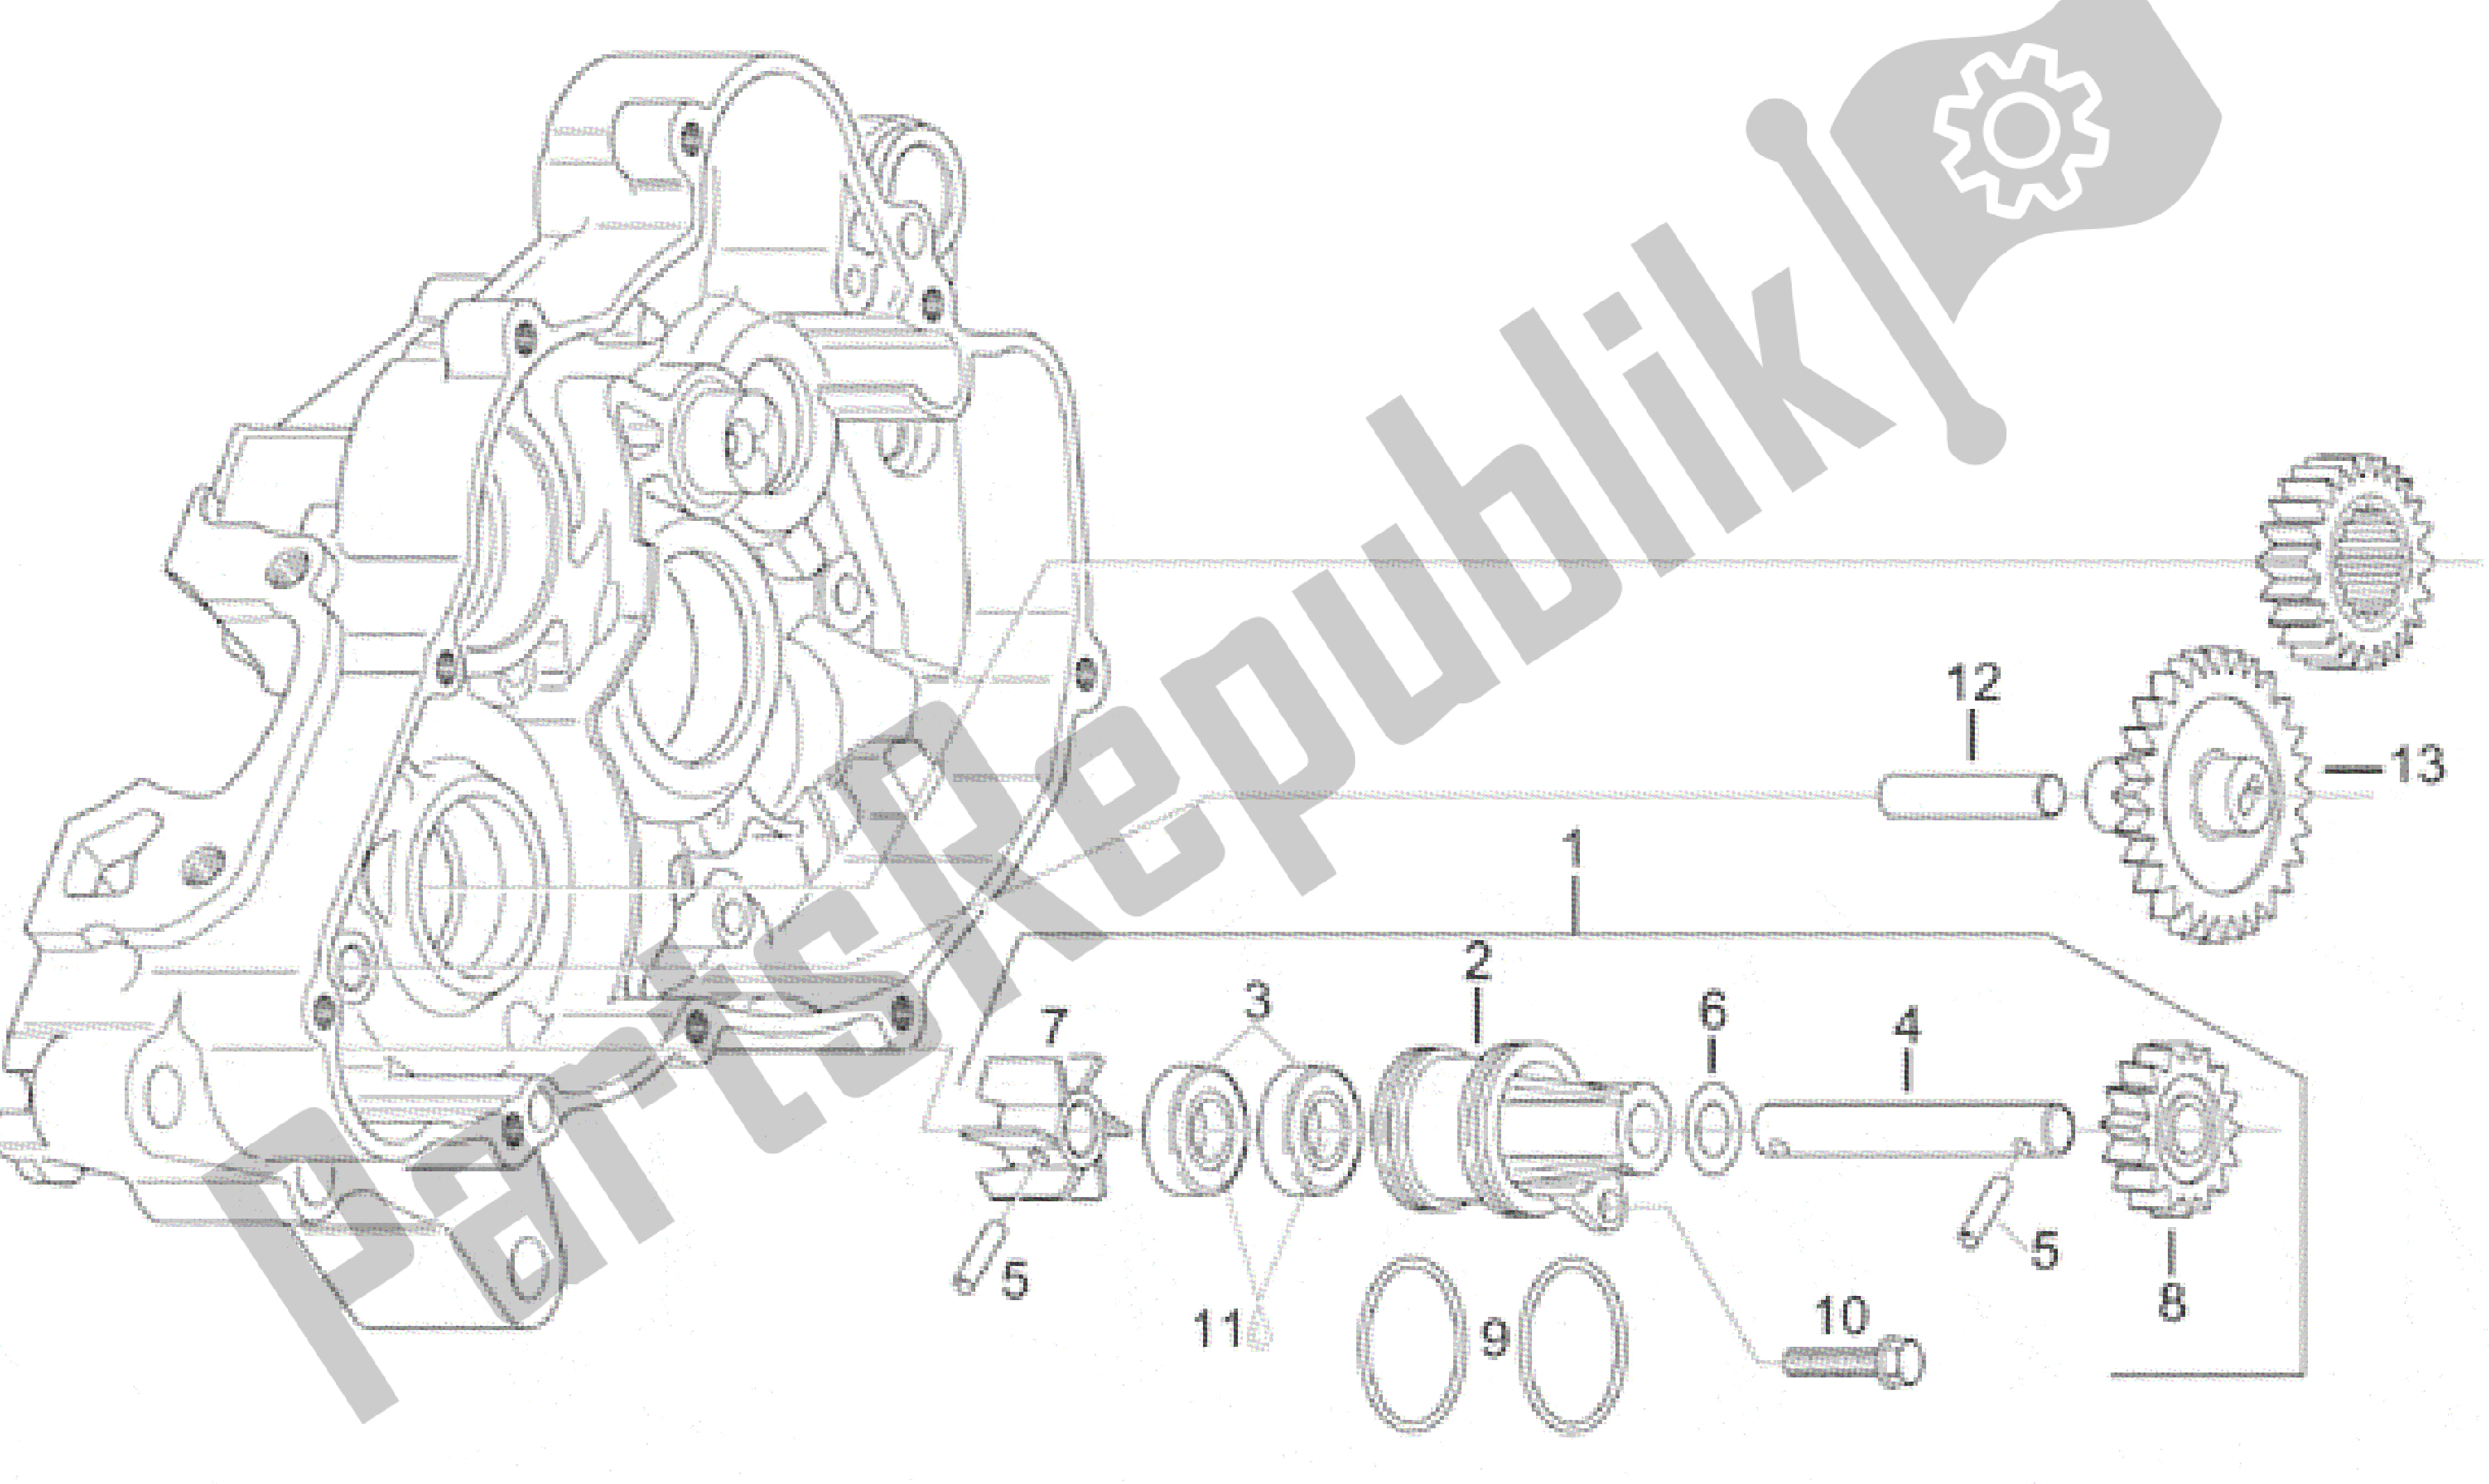 All parts for the Water Pump Assy of the Aprilia Classic 125 1995 - 1999